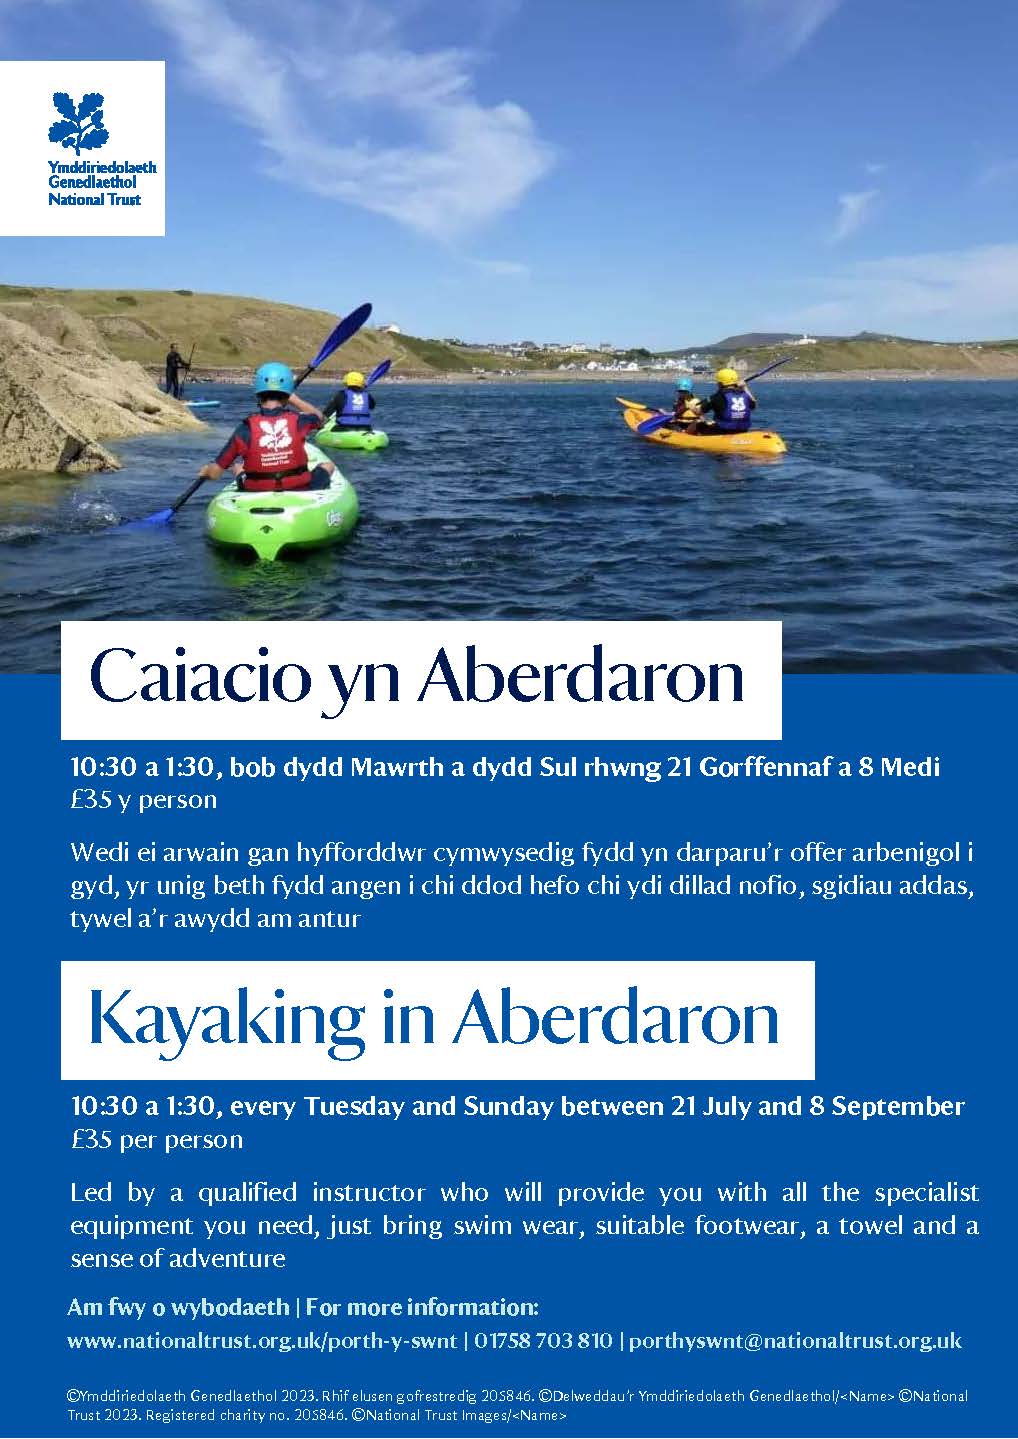 Kayaking in Aerdaron - 10:30 a 1:30, every Tuesday and Sunay between 21 July and 8 September. £35 per person